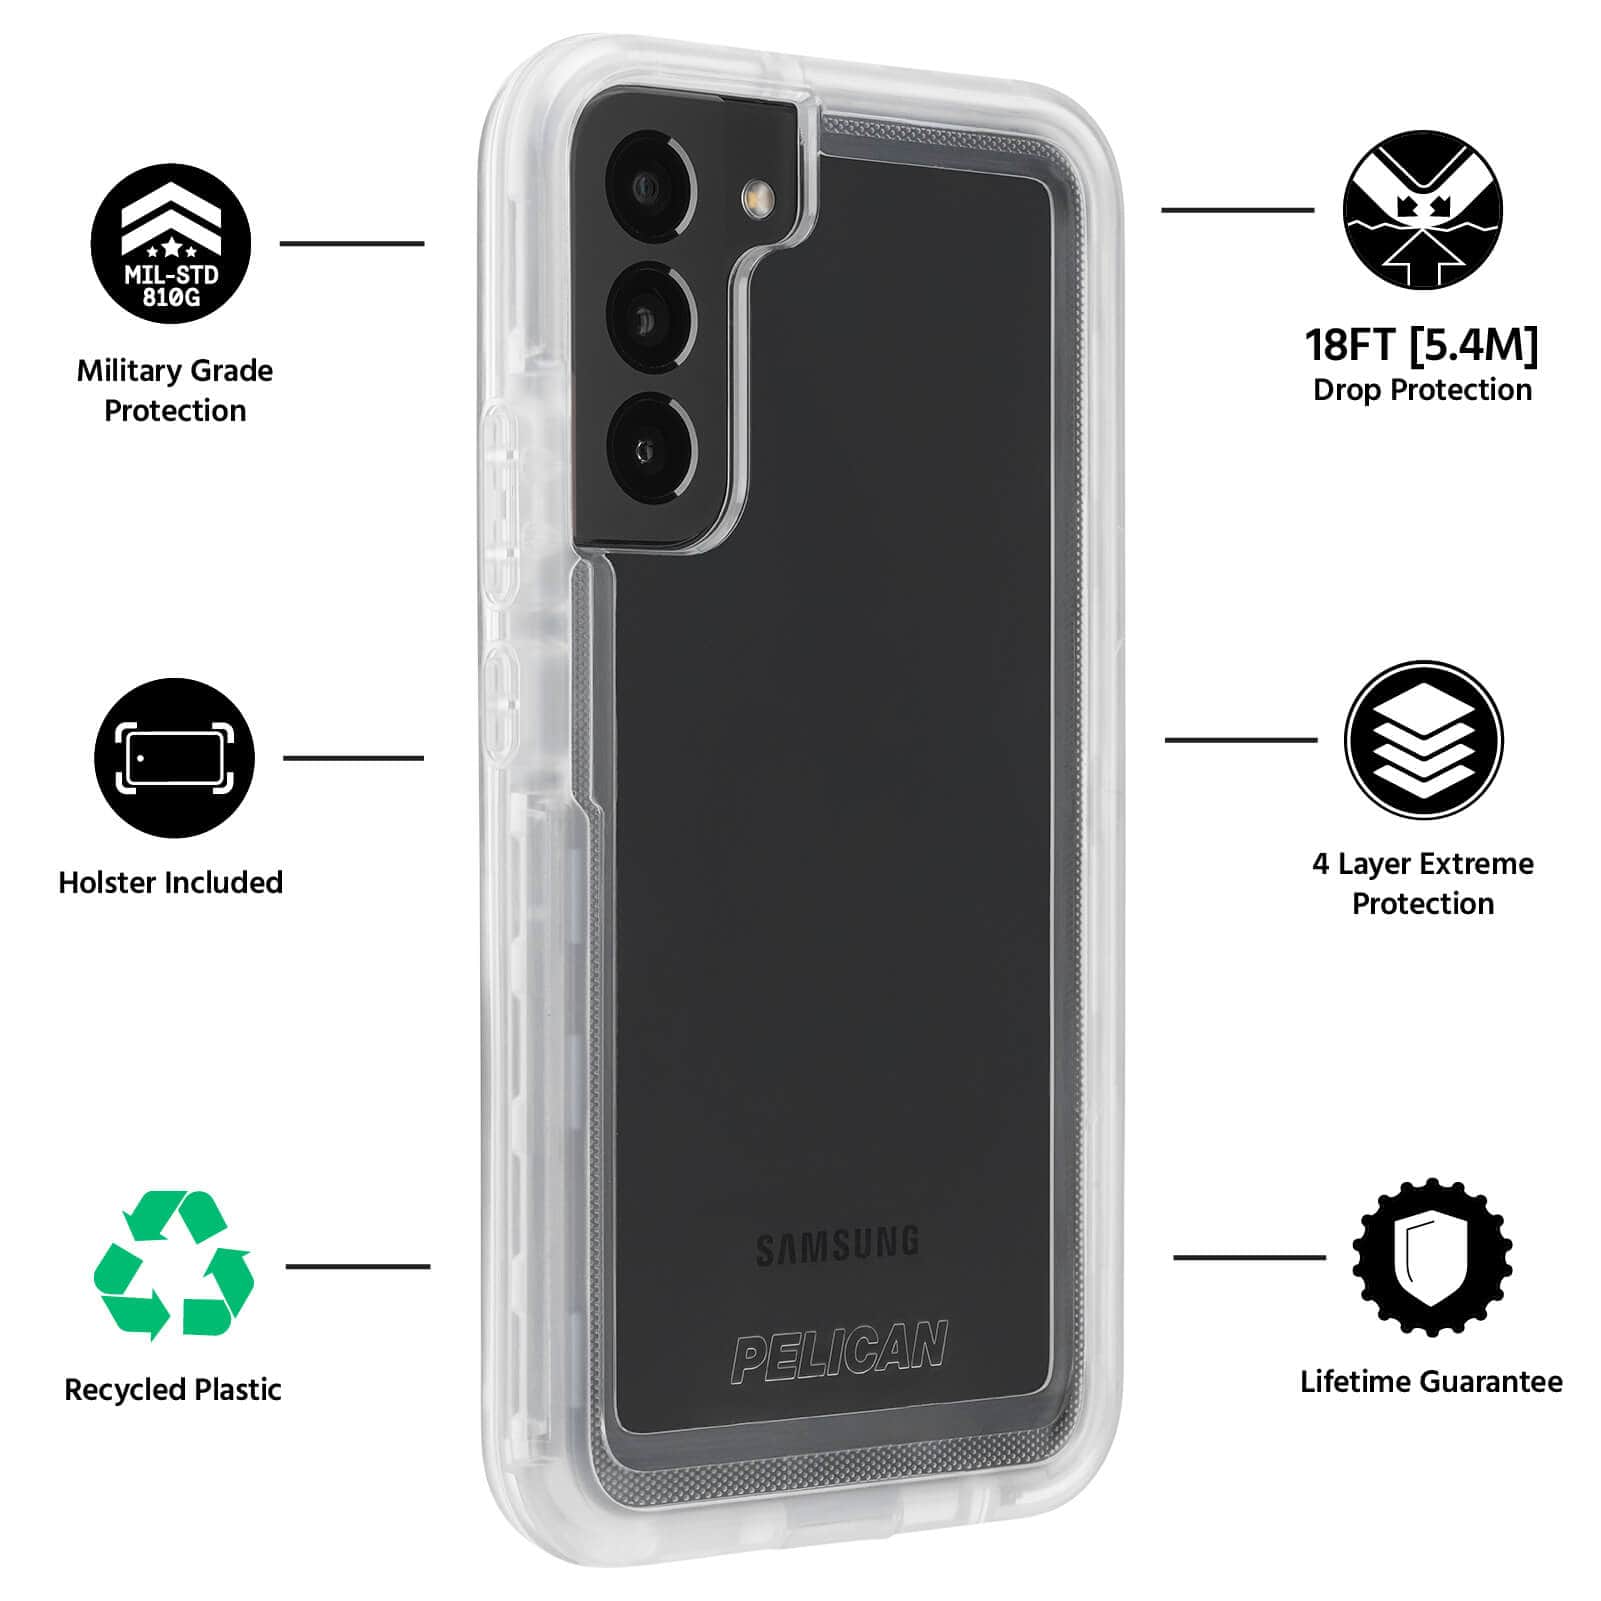 FEATURES: MILITARY GRADE PROTECTION, HOLSTER INCLUDED, RECYCLED PLASTIC, 18FT DROP PROTECTION, 4 LAYER EXTREME PROTECTION, LIFETIME GUARANTEE. COLOR::CLEAR